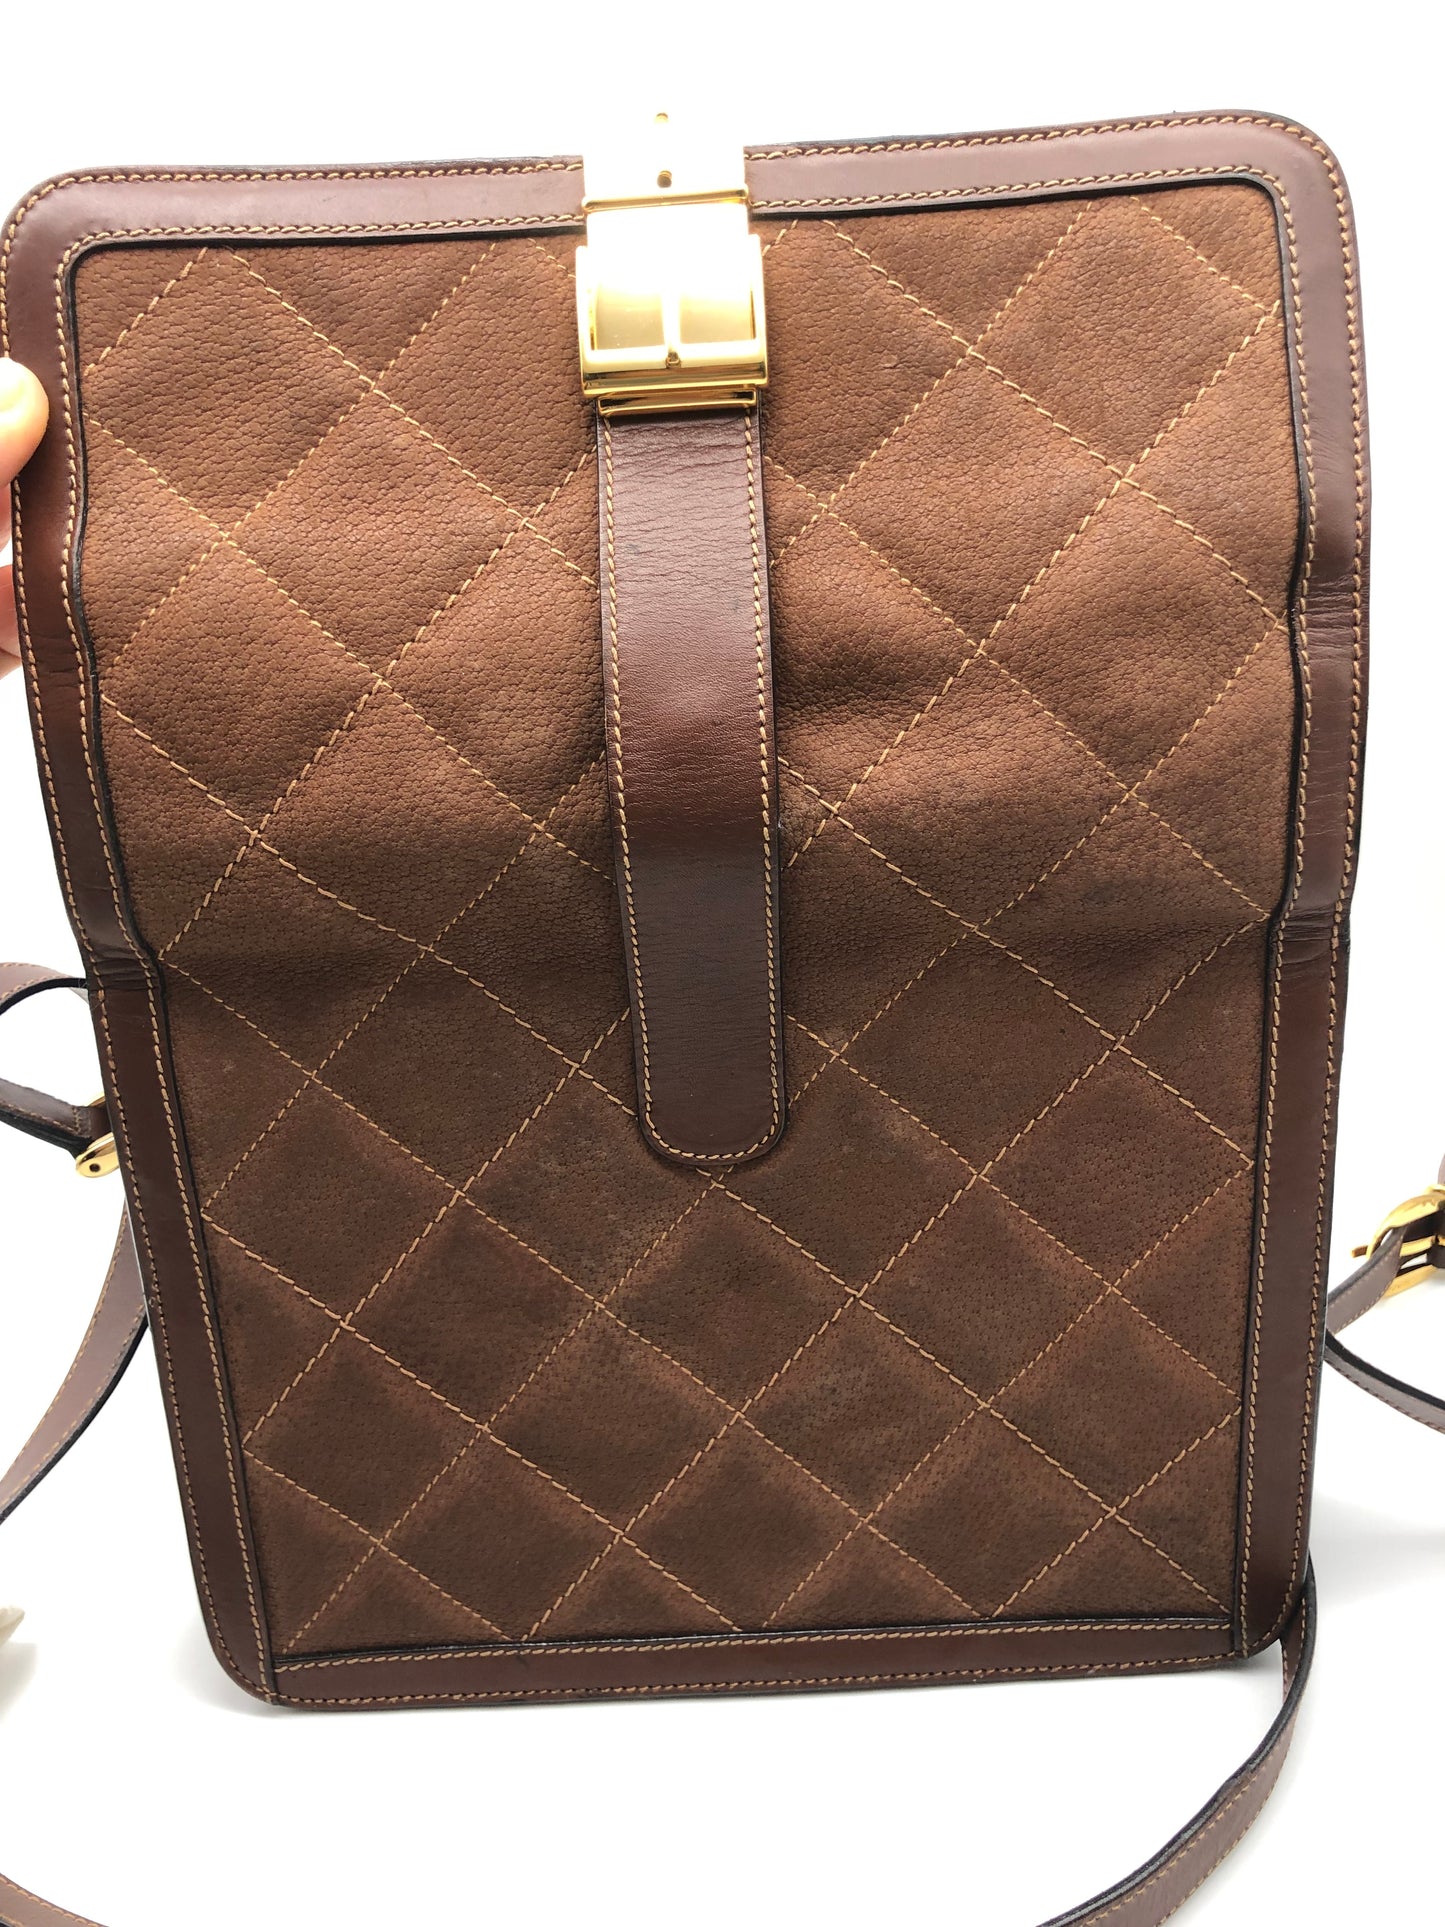 Authentic Gucci Brown Quilted Suede Box Shape Shoulder Crossbody Bag